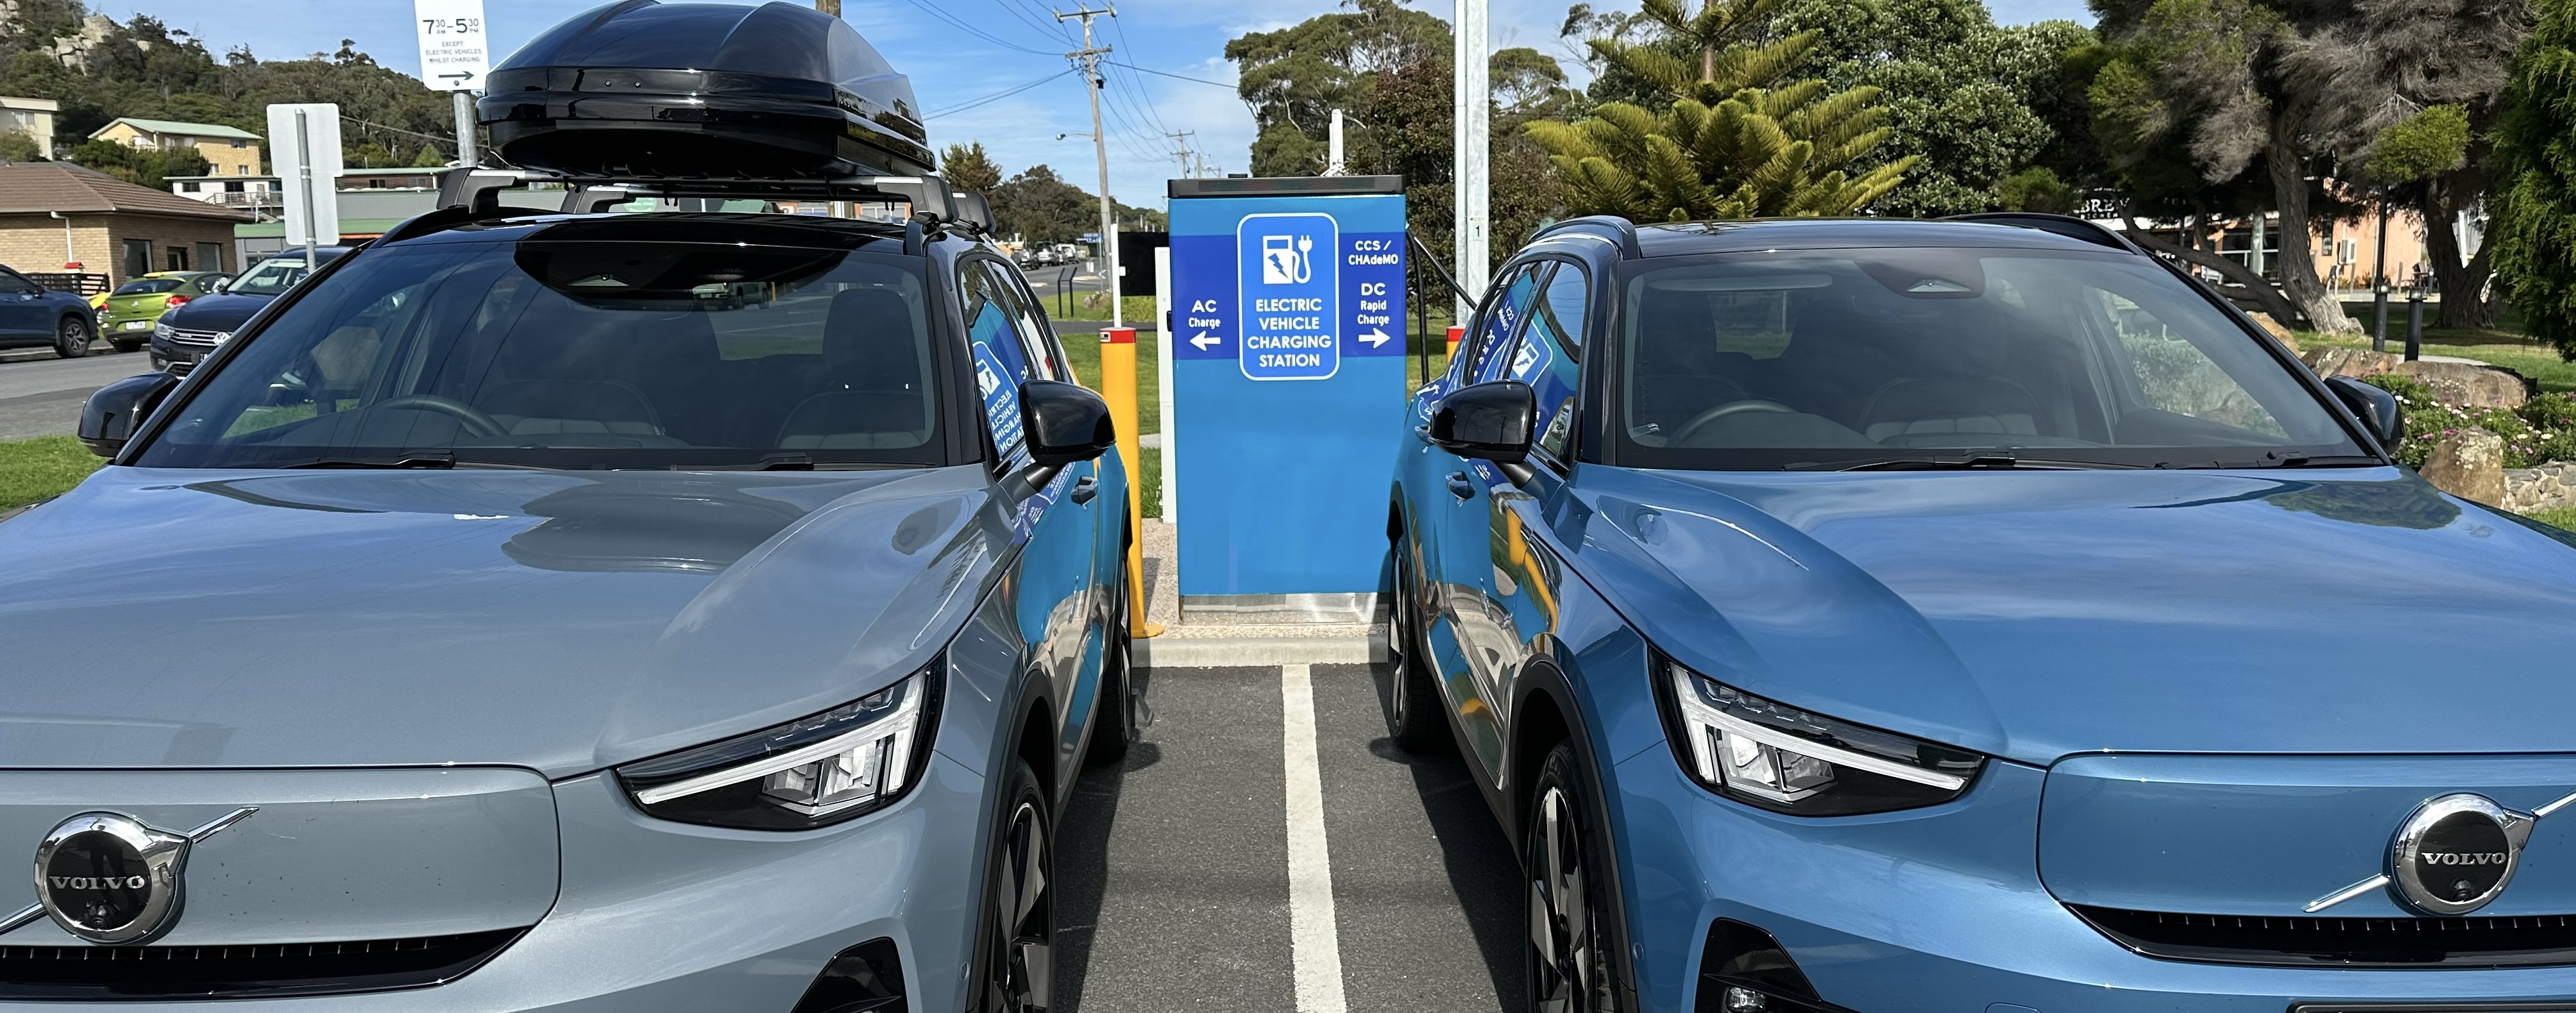 Photograph of Bicheno Public EV Charging Station with Volvo XC40 vehicles